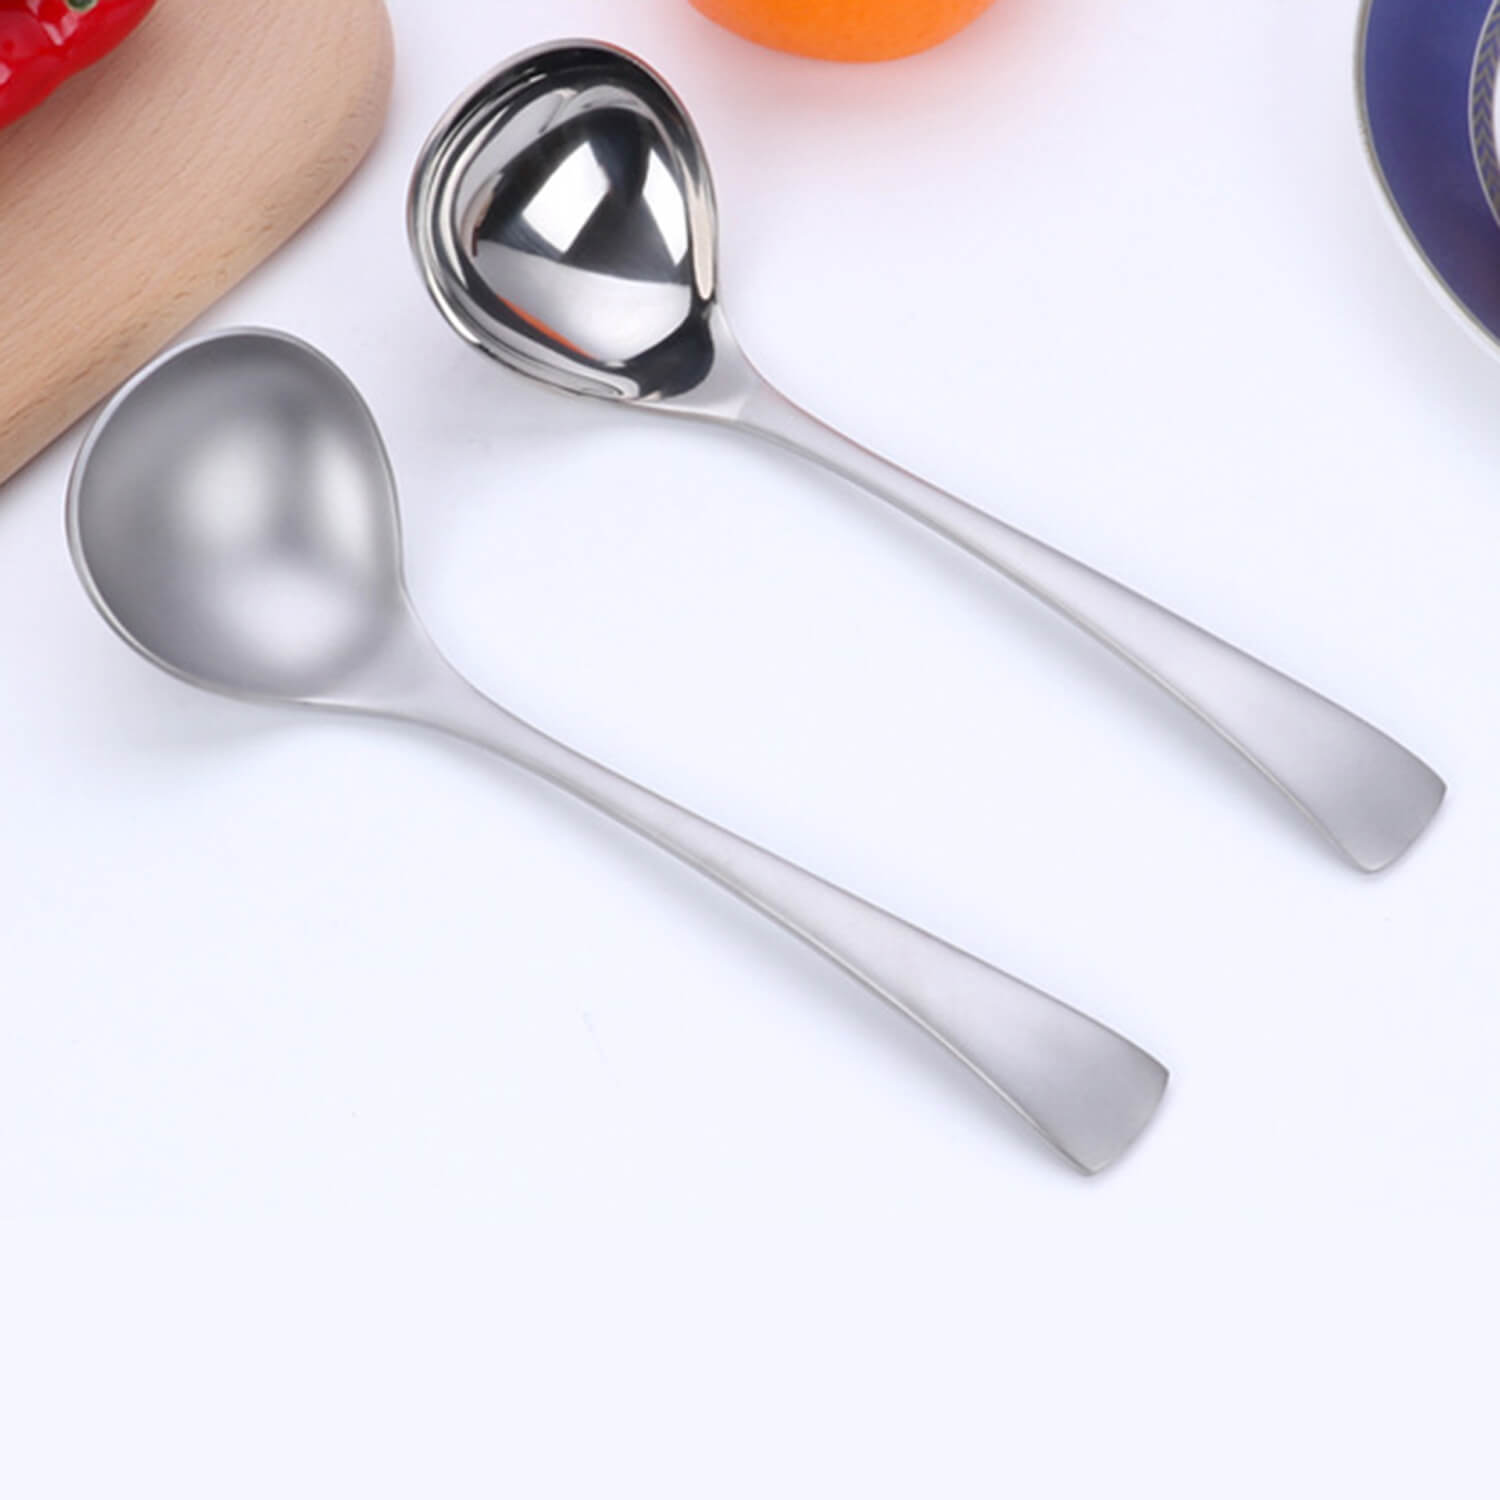 A Healthy Alternative: Solid Titanium Cutlery Set by Woerden by